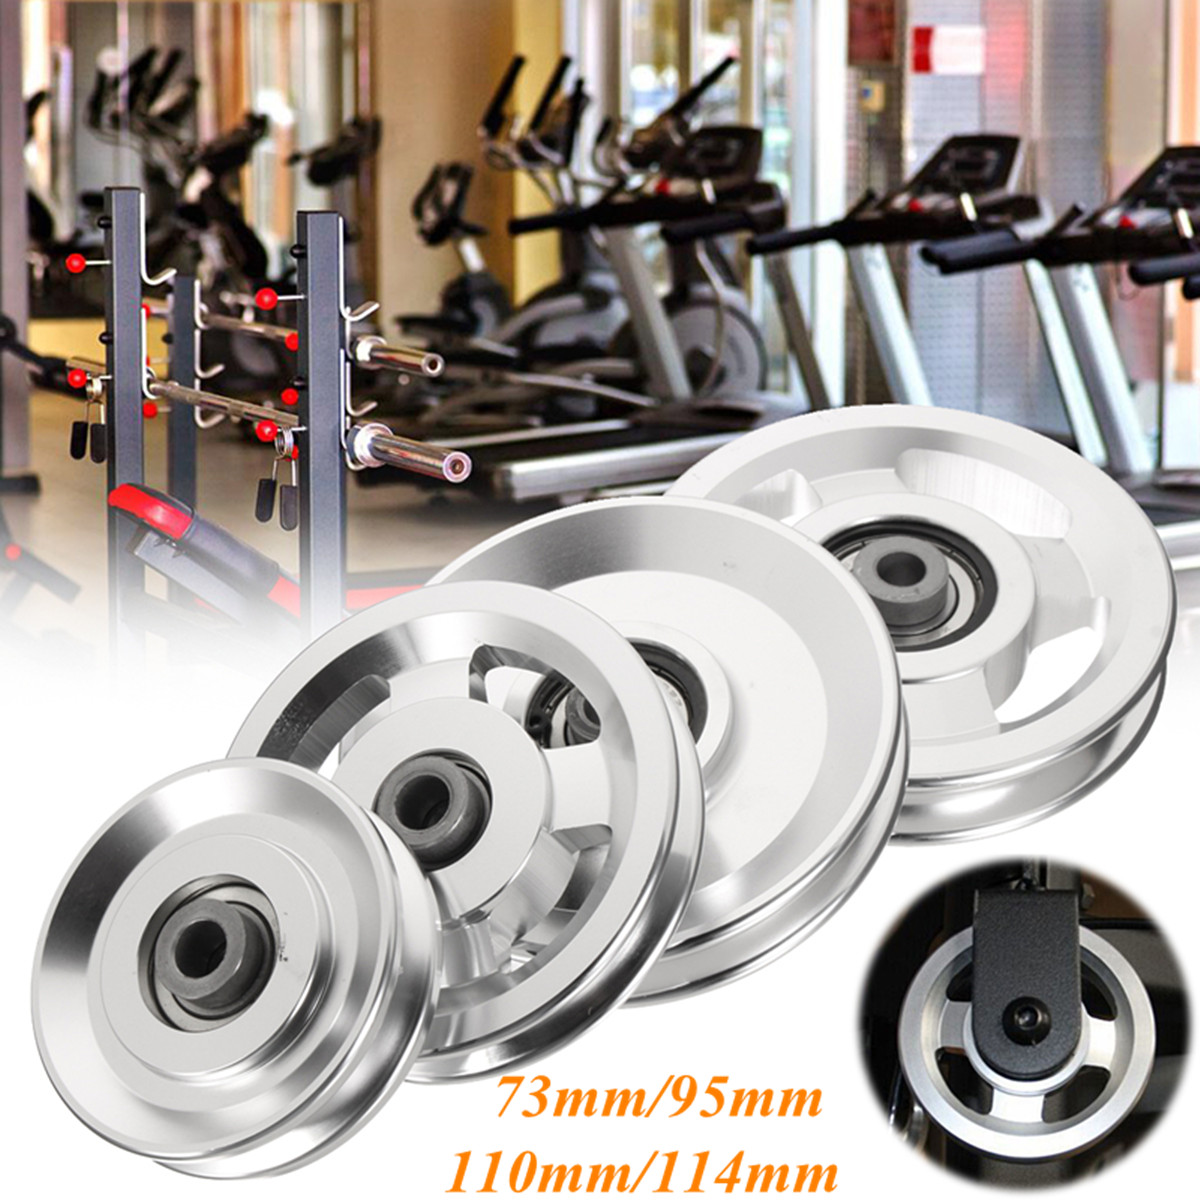 7395110114mm-Aluminum-Alloy-Bearing-Pulley-Wheels-Gym-Fitness-Equipment-Parts-Accessories-1637784-1